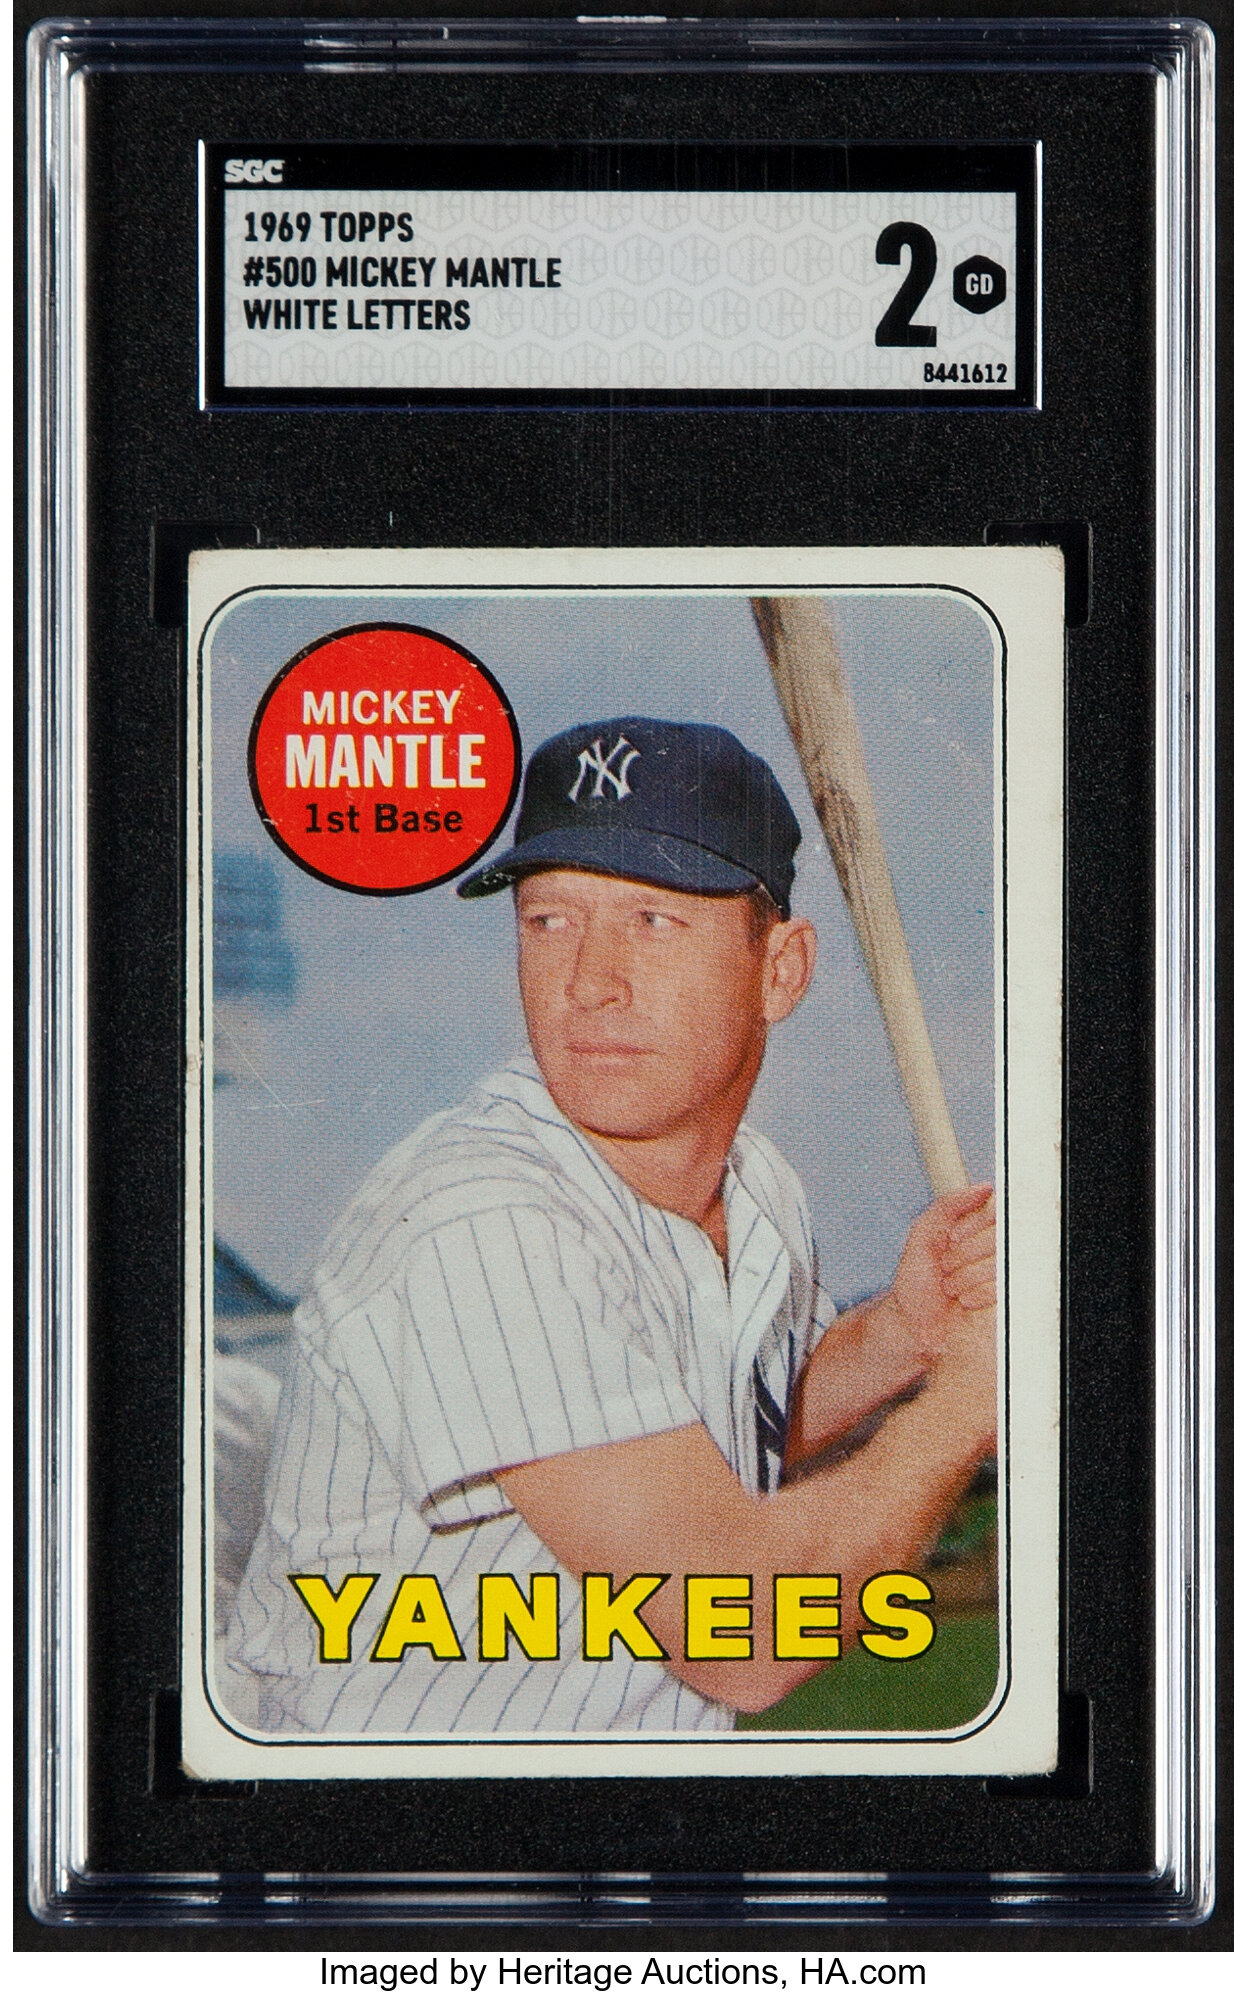 1969 Topps Mickey Mantle Last Name In Yellow New York Yankees Card #500 PSA  2